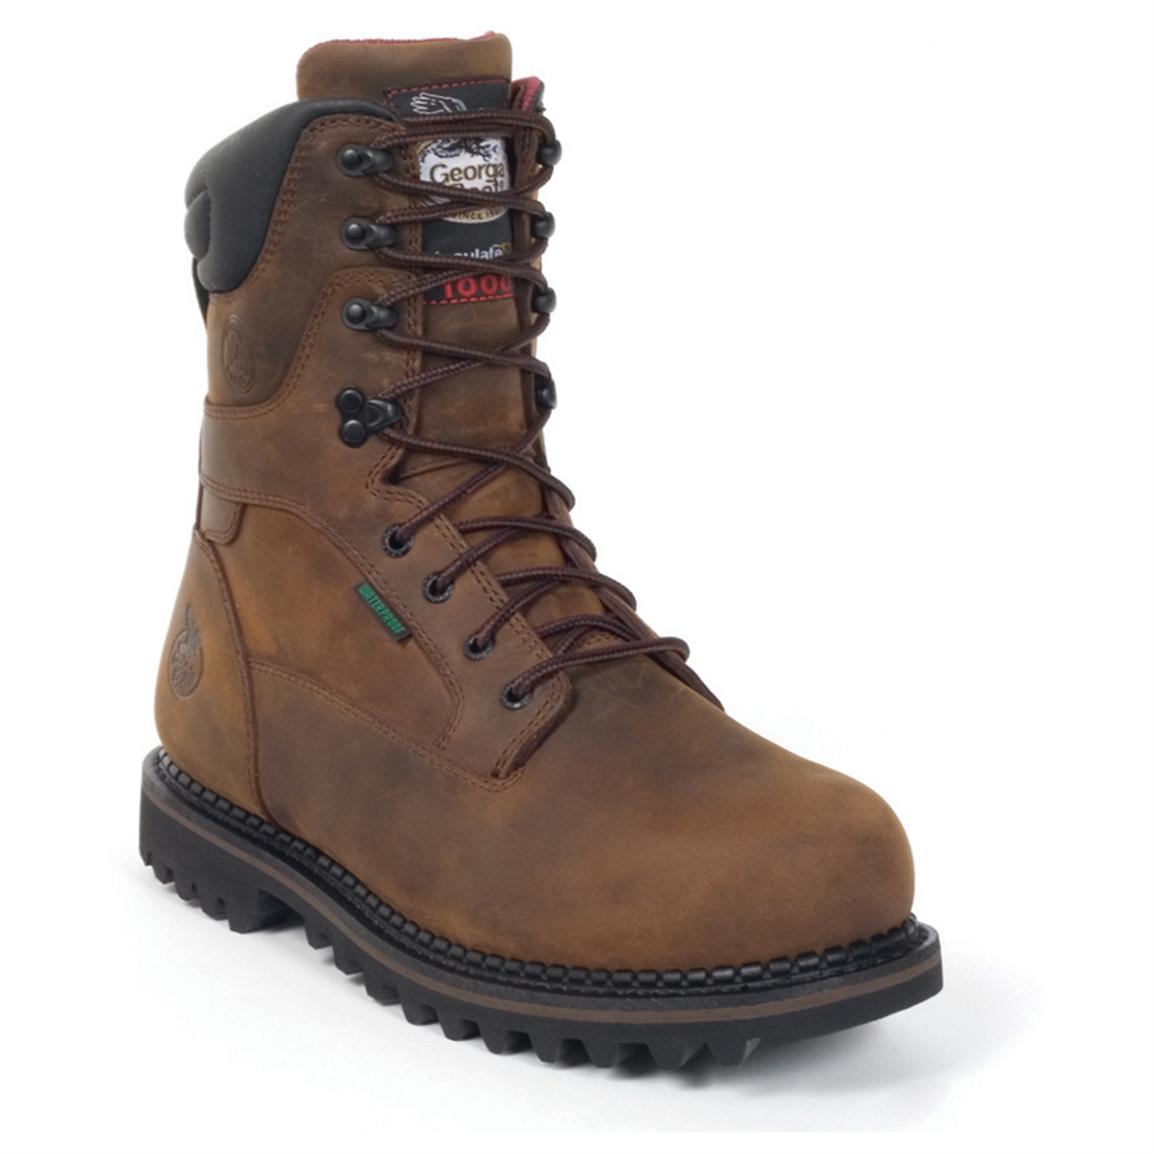 1000 gram insulated composite toe boots